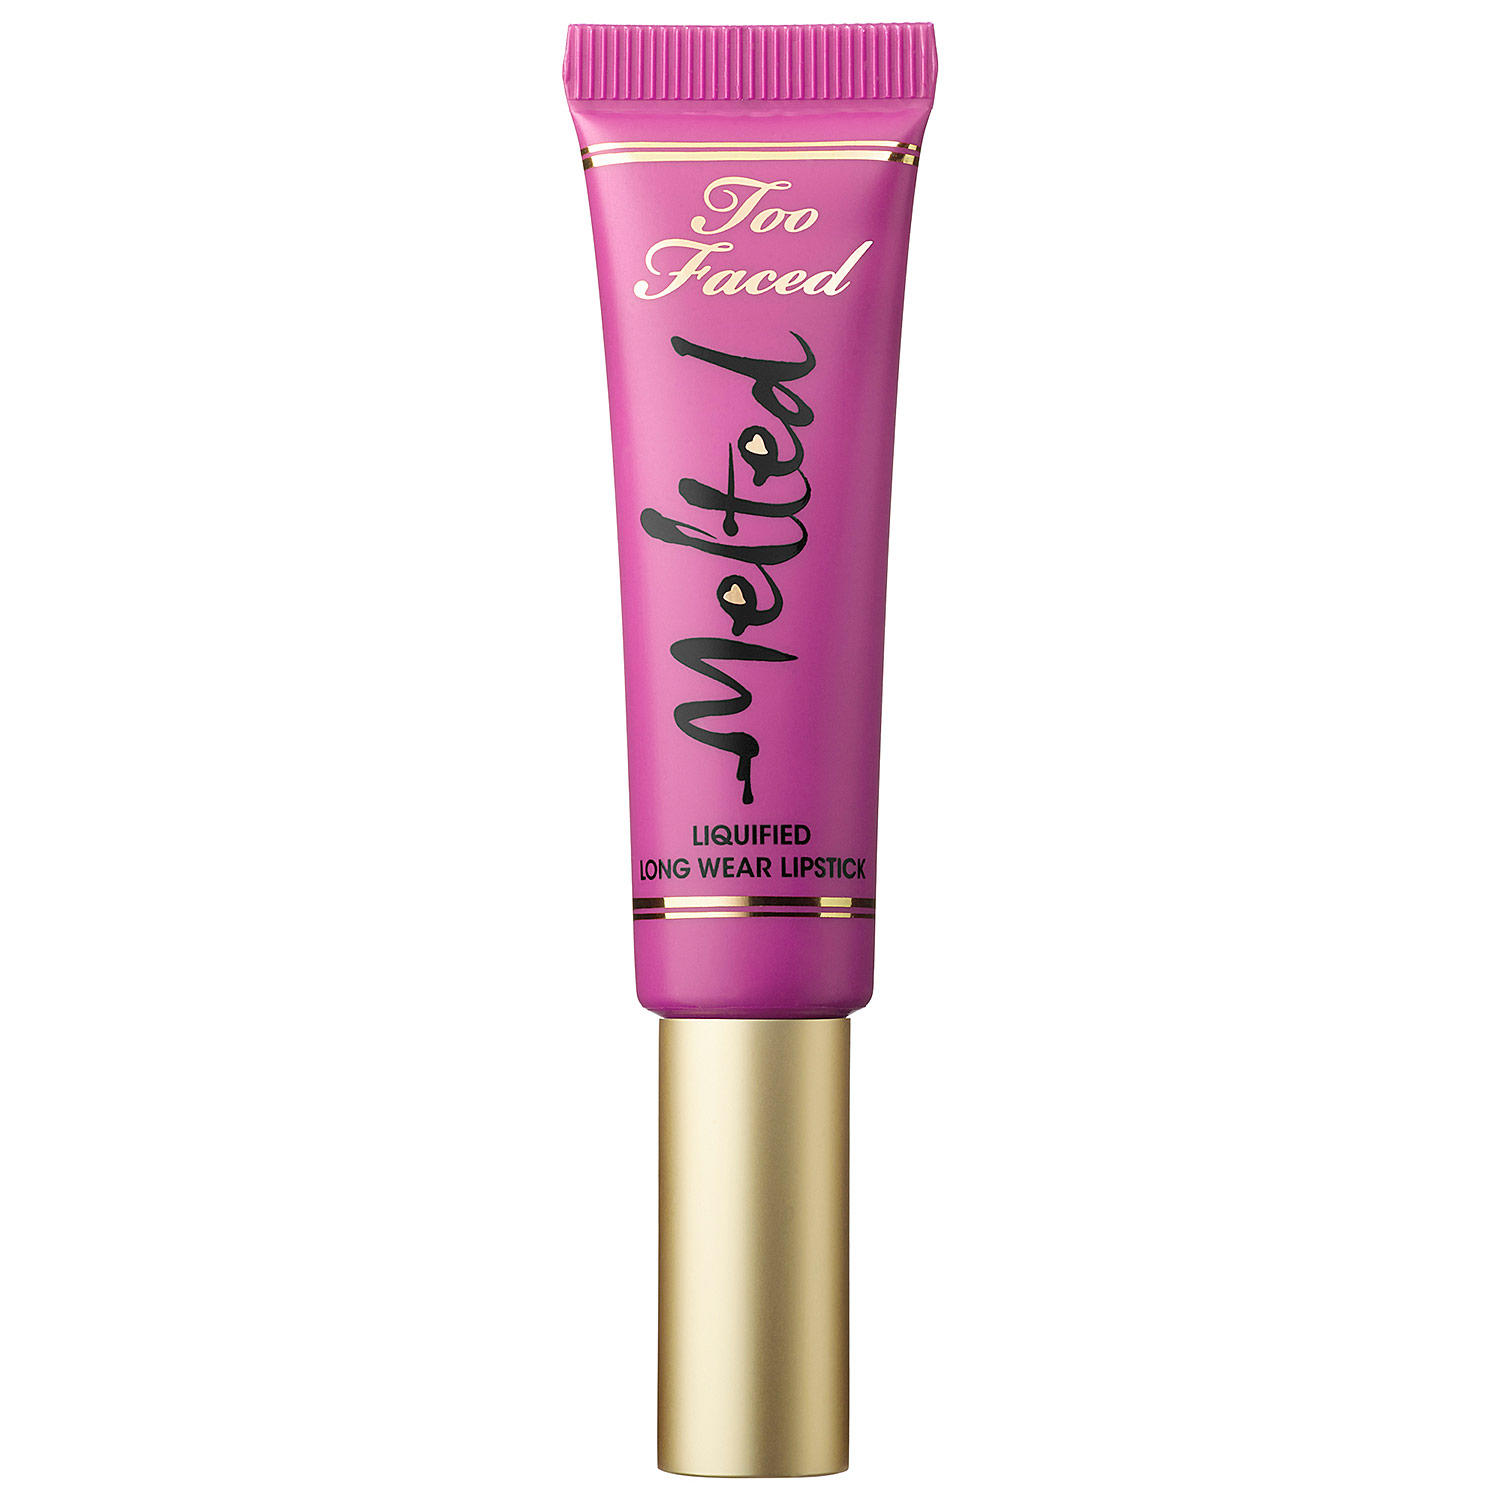 Too Faced Melted Liquified Long-Wear Lipstick Melted Violet